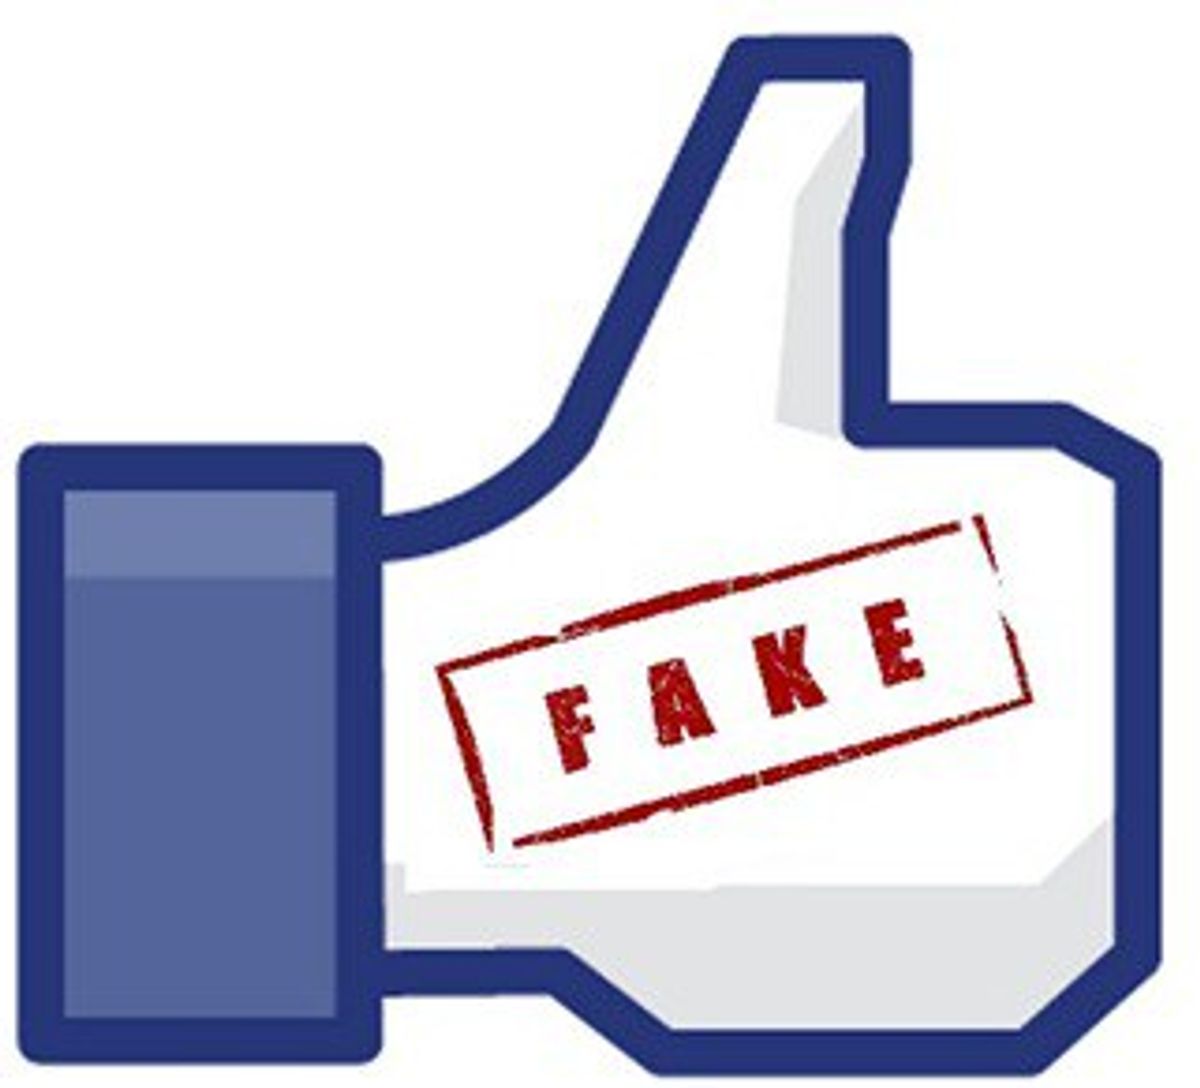 Facebook Is Becoming A Joke With Accounts Promoting Fake Stories For Page Views